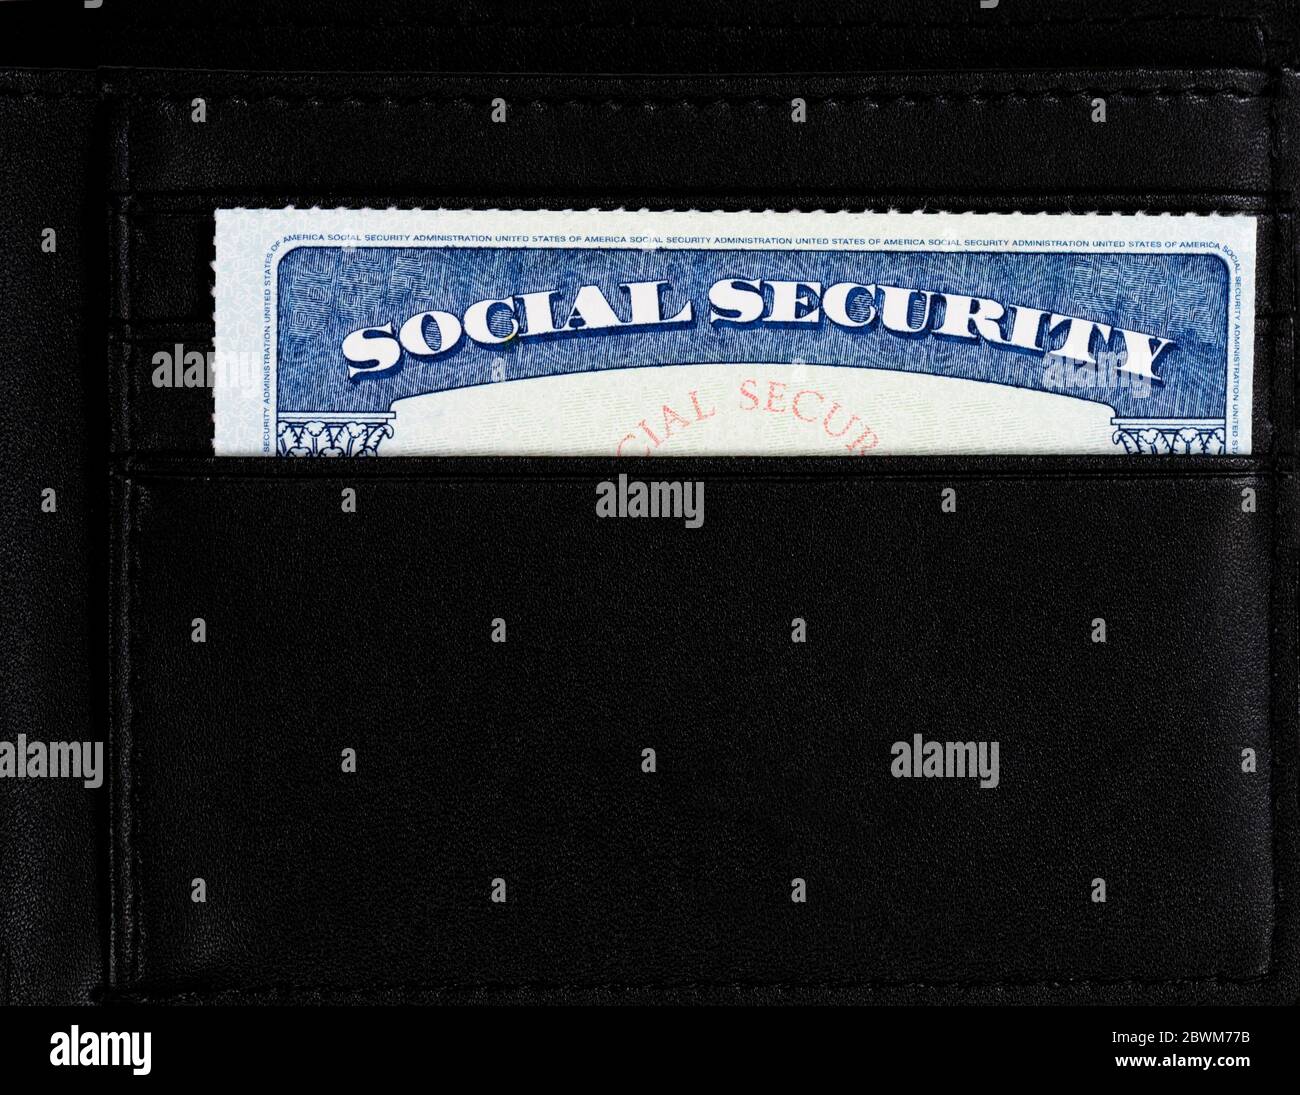 United States Social Security card inside of leather wallet Stock Photo